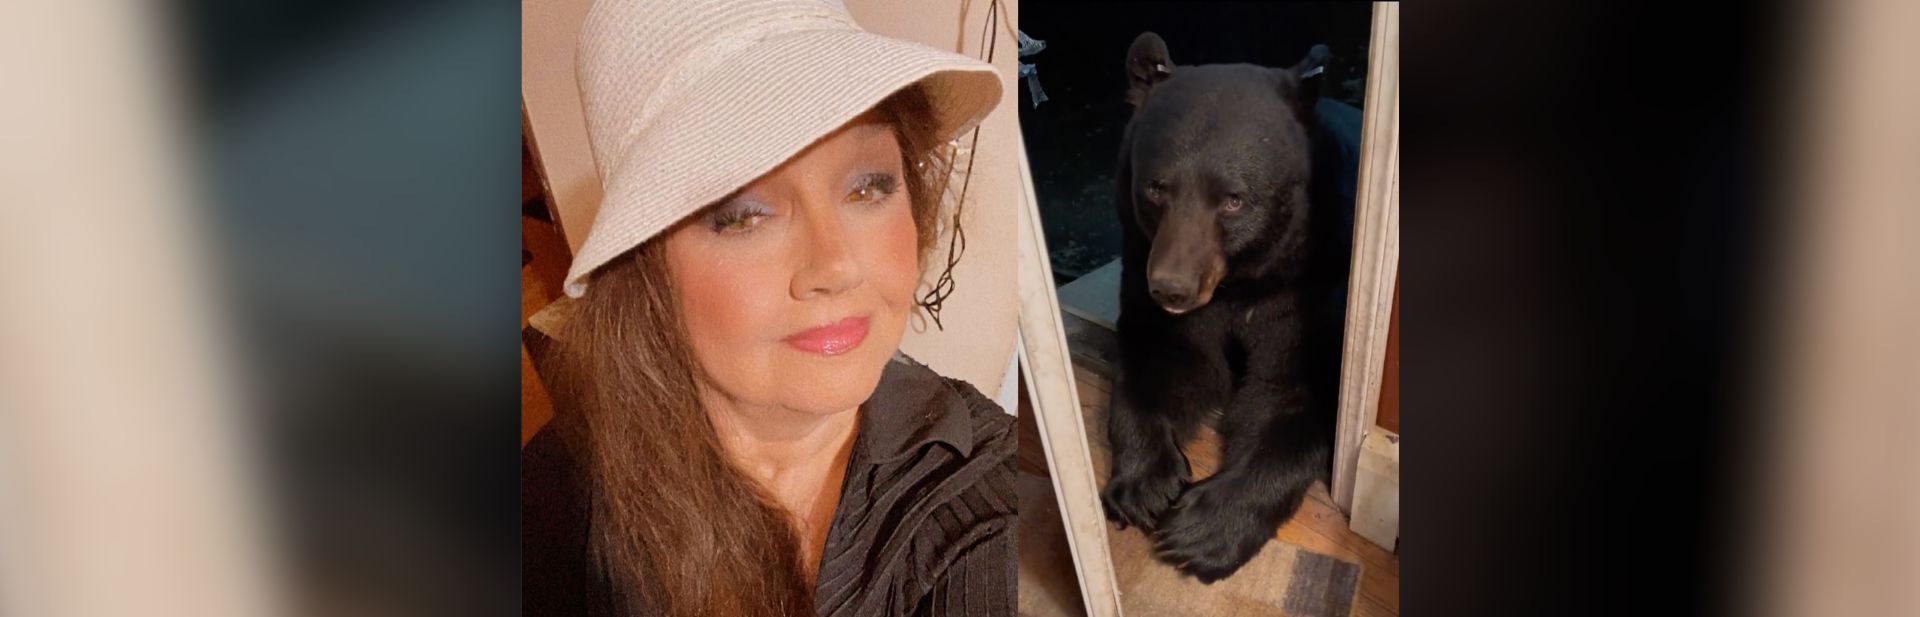 New Jersey Woman’s Unusual Bond with Porch-Visiting Black Bears Goes Viral